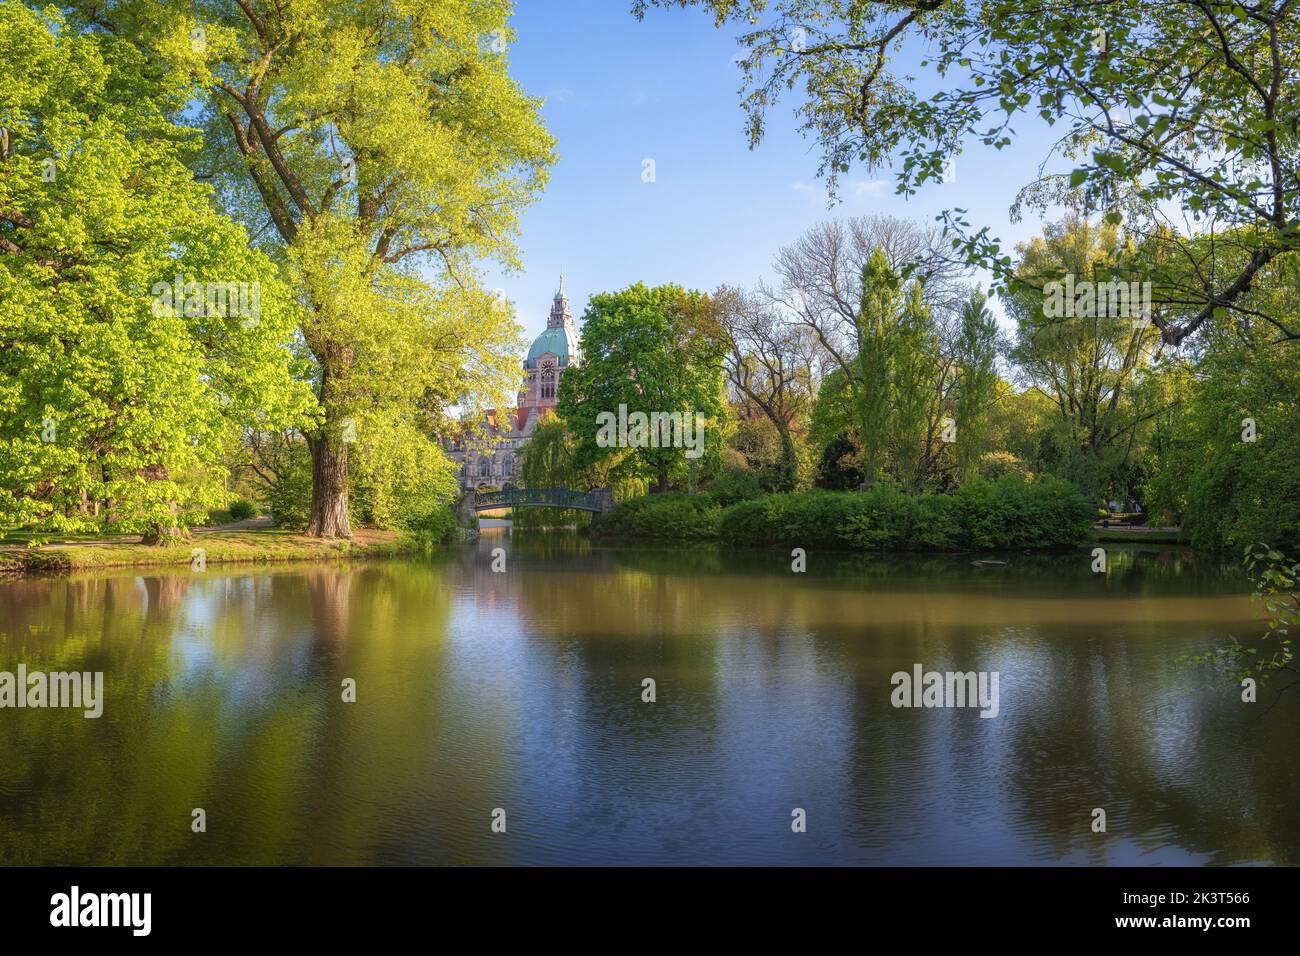 The beautiful maschpark with the new Town Hall in the distance in Hannover, Germany Stock Photo